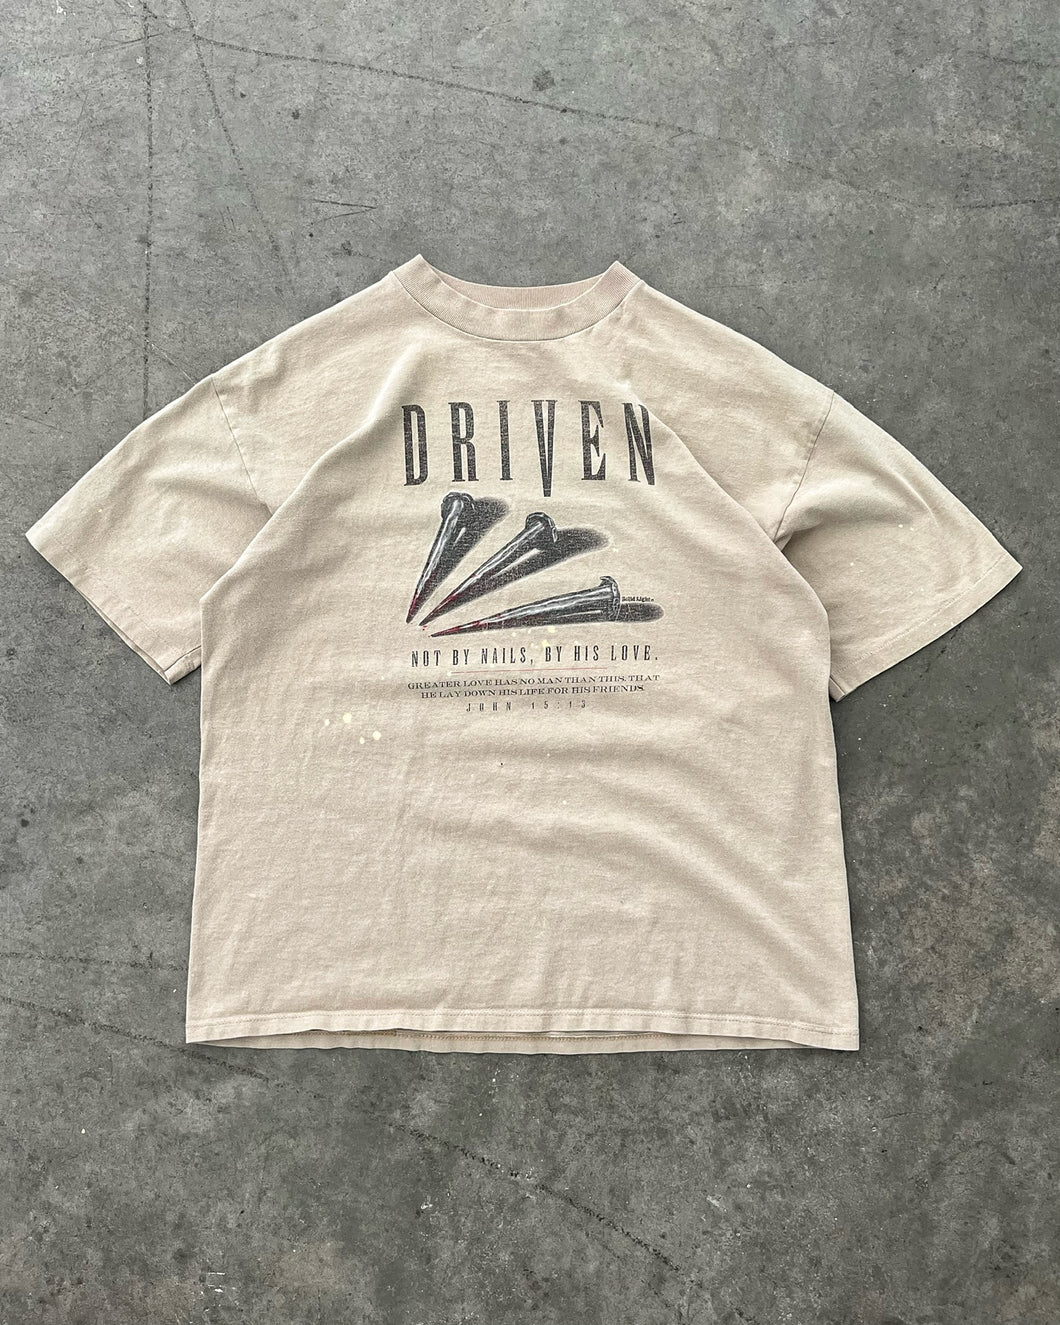 SINGLE STITCHED “DRIVEN” FADED TAN TEE - 1990S